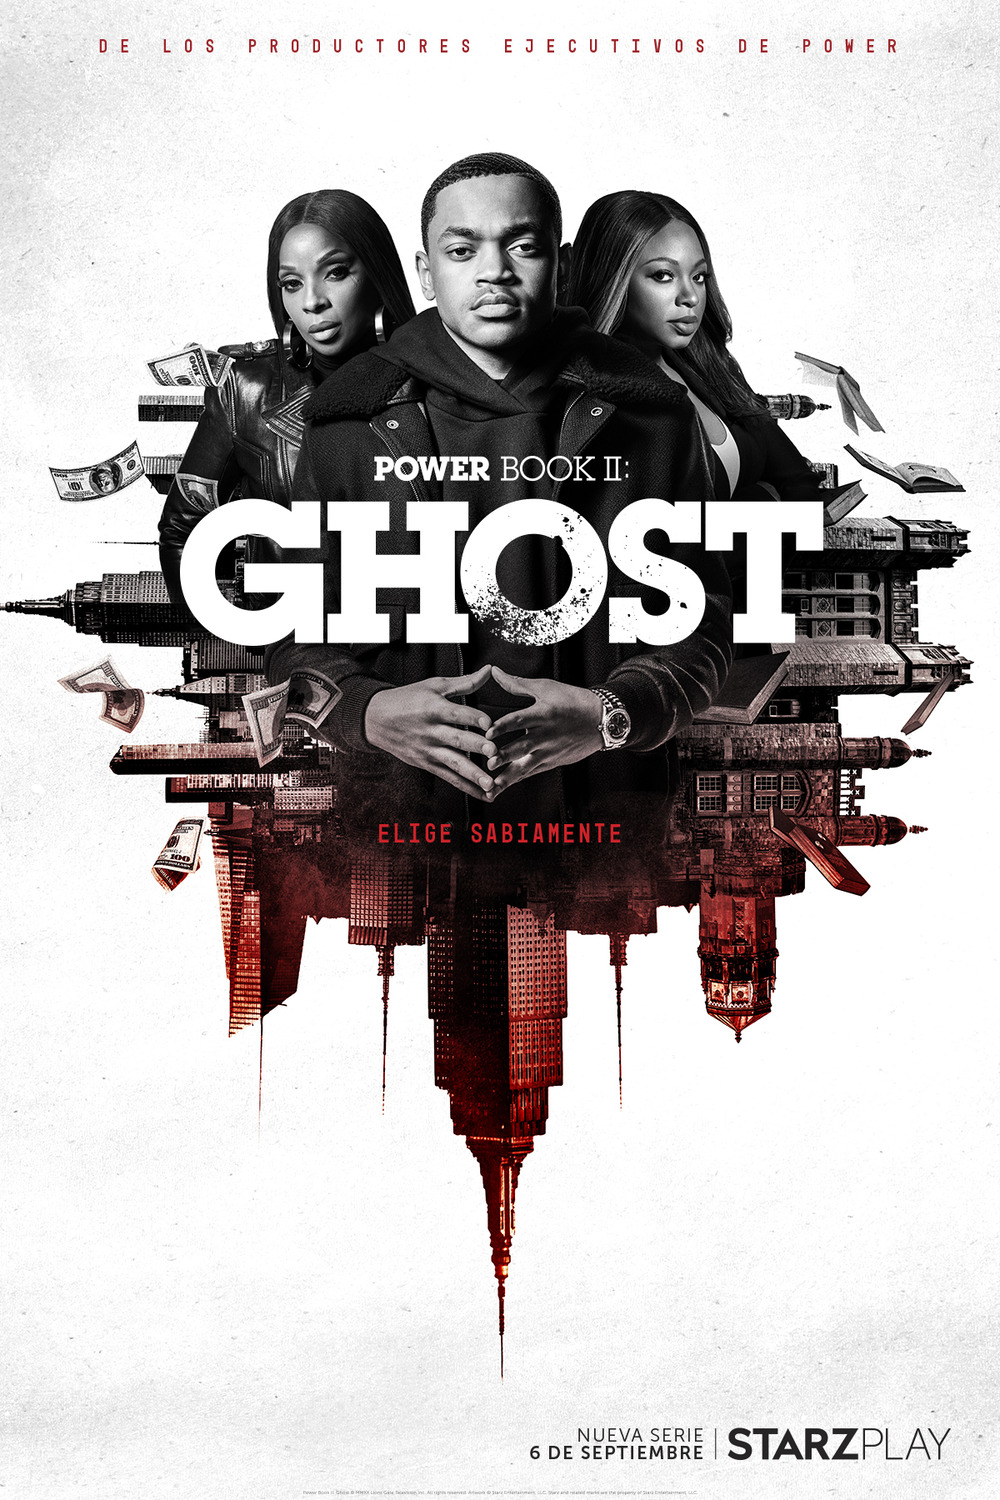 Extra Large TV Poster Image for Power Book II: Ghost (#2 of 13)